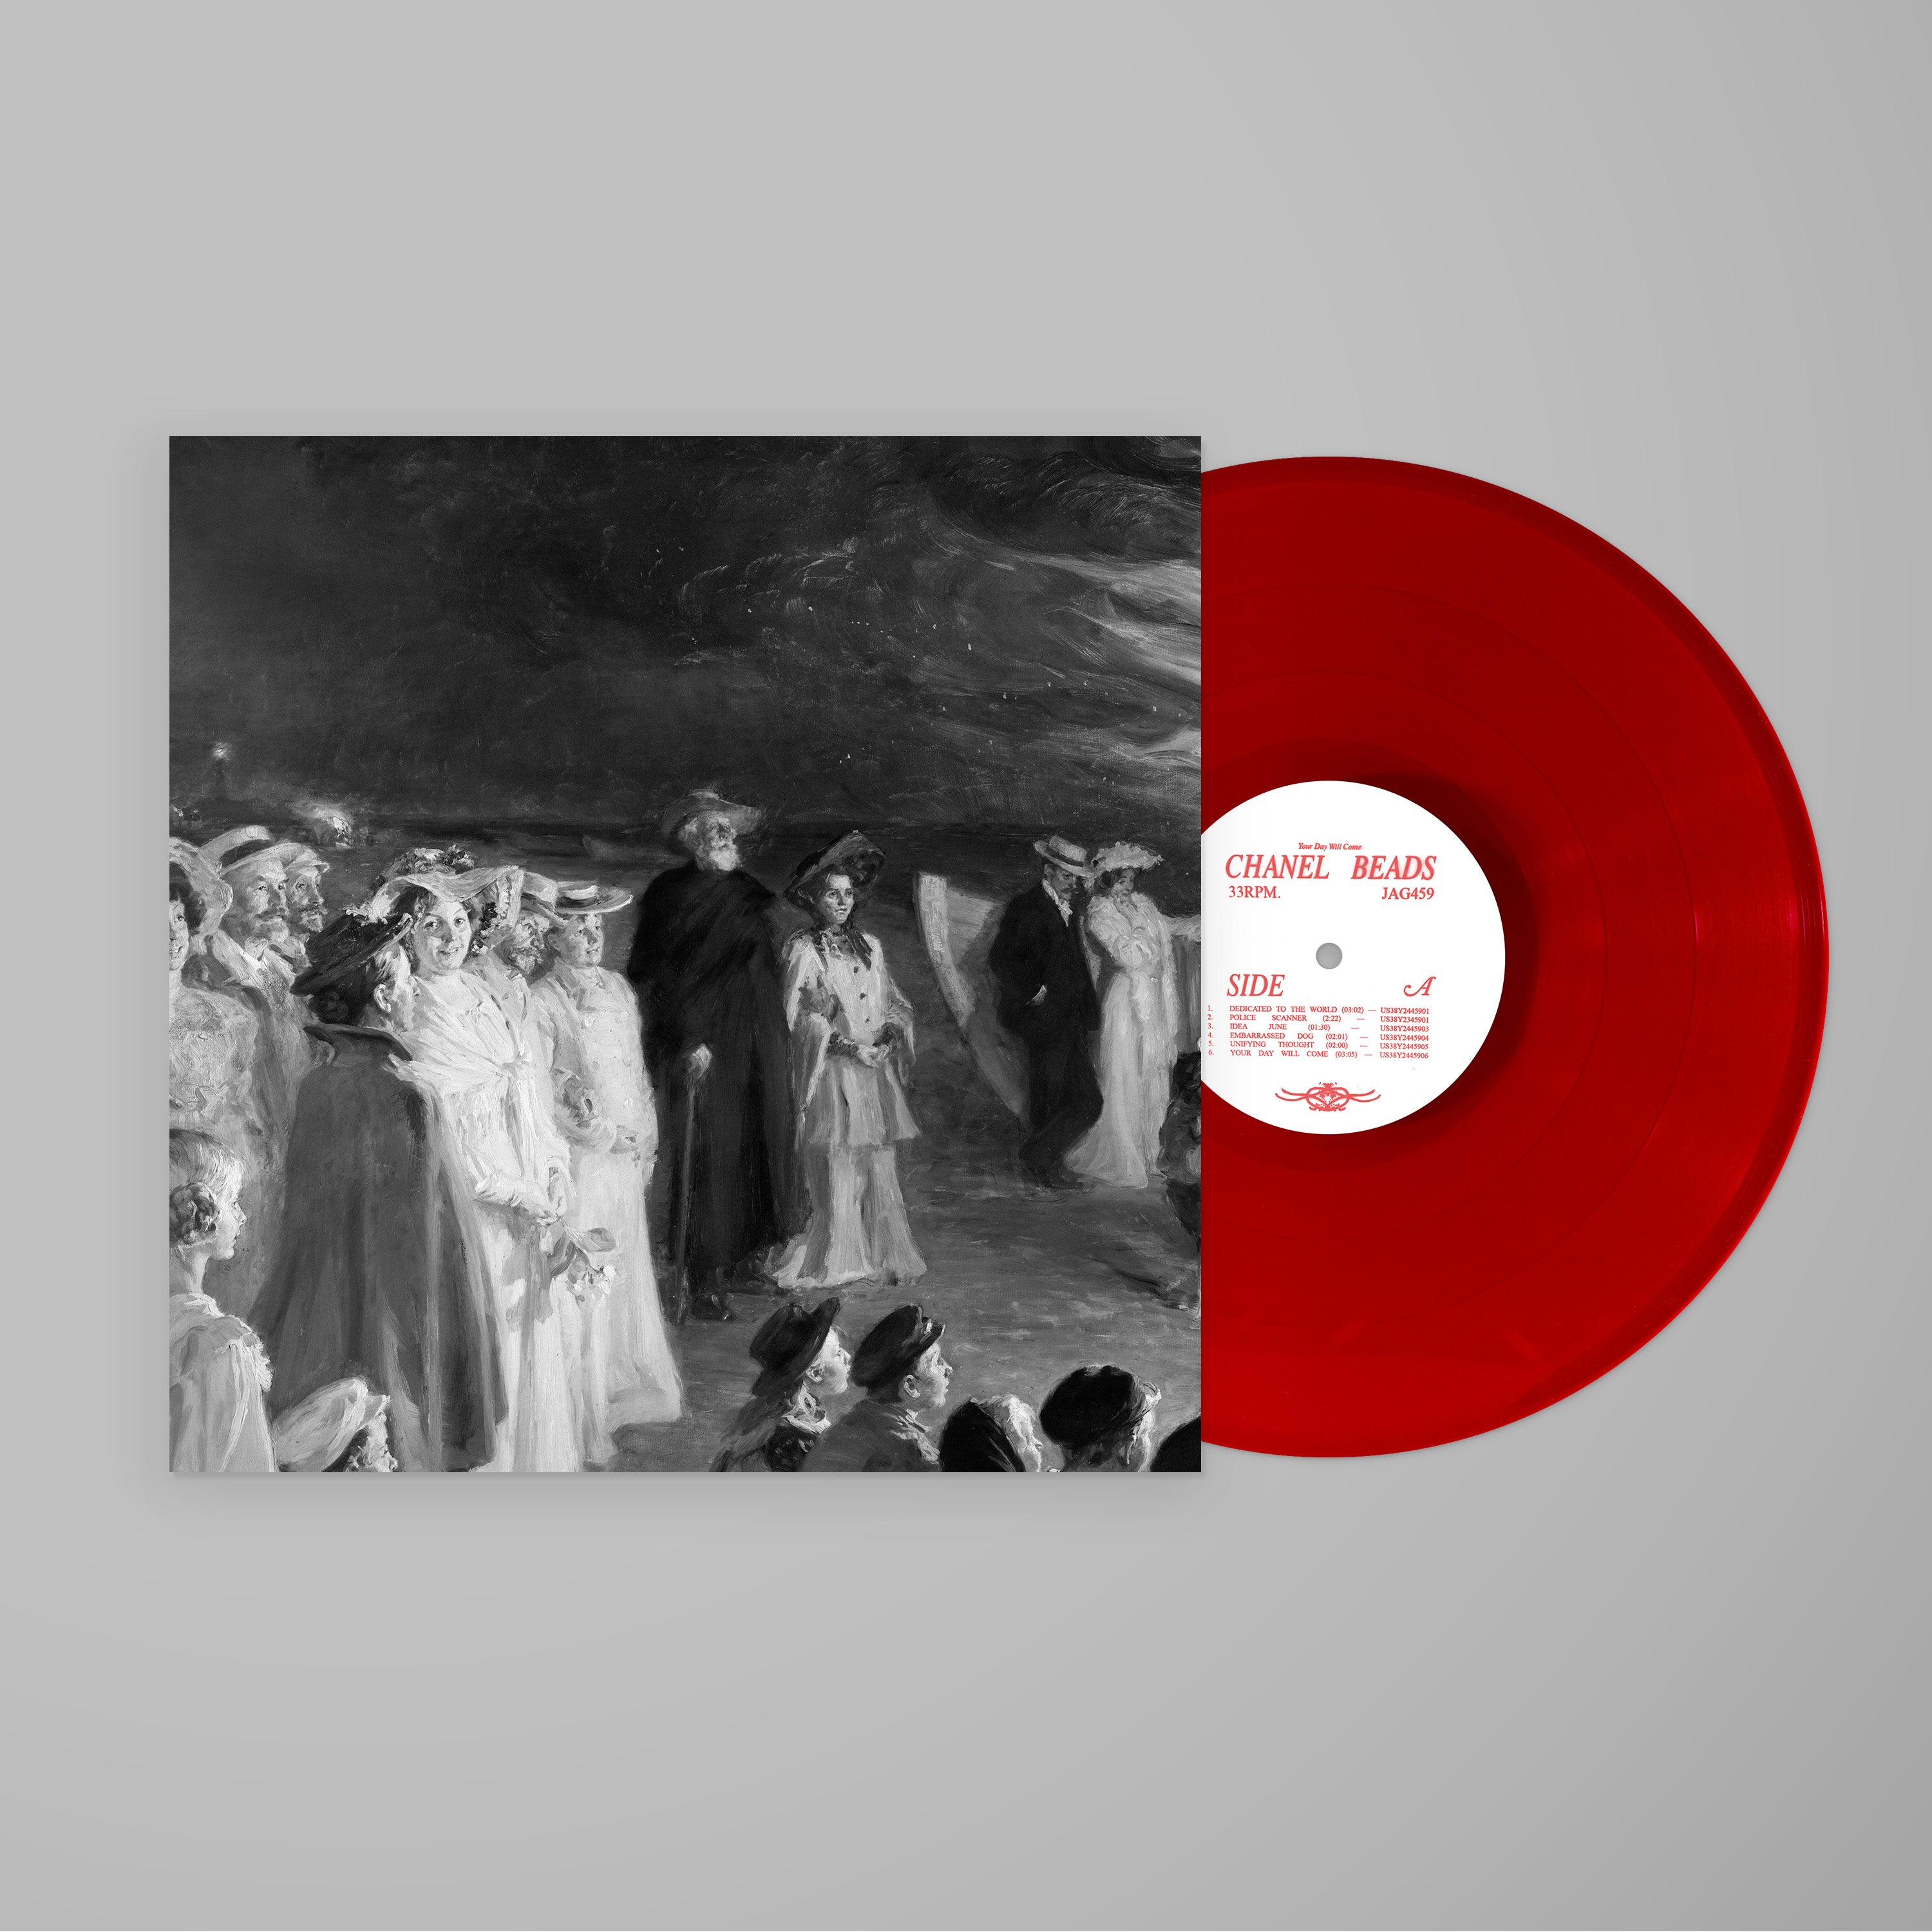 Chanel Beads - Your Day Will Come: Limited Opaque Red Vinyl LP